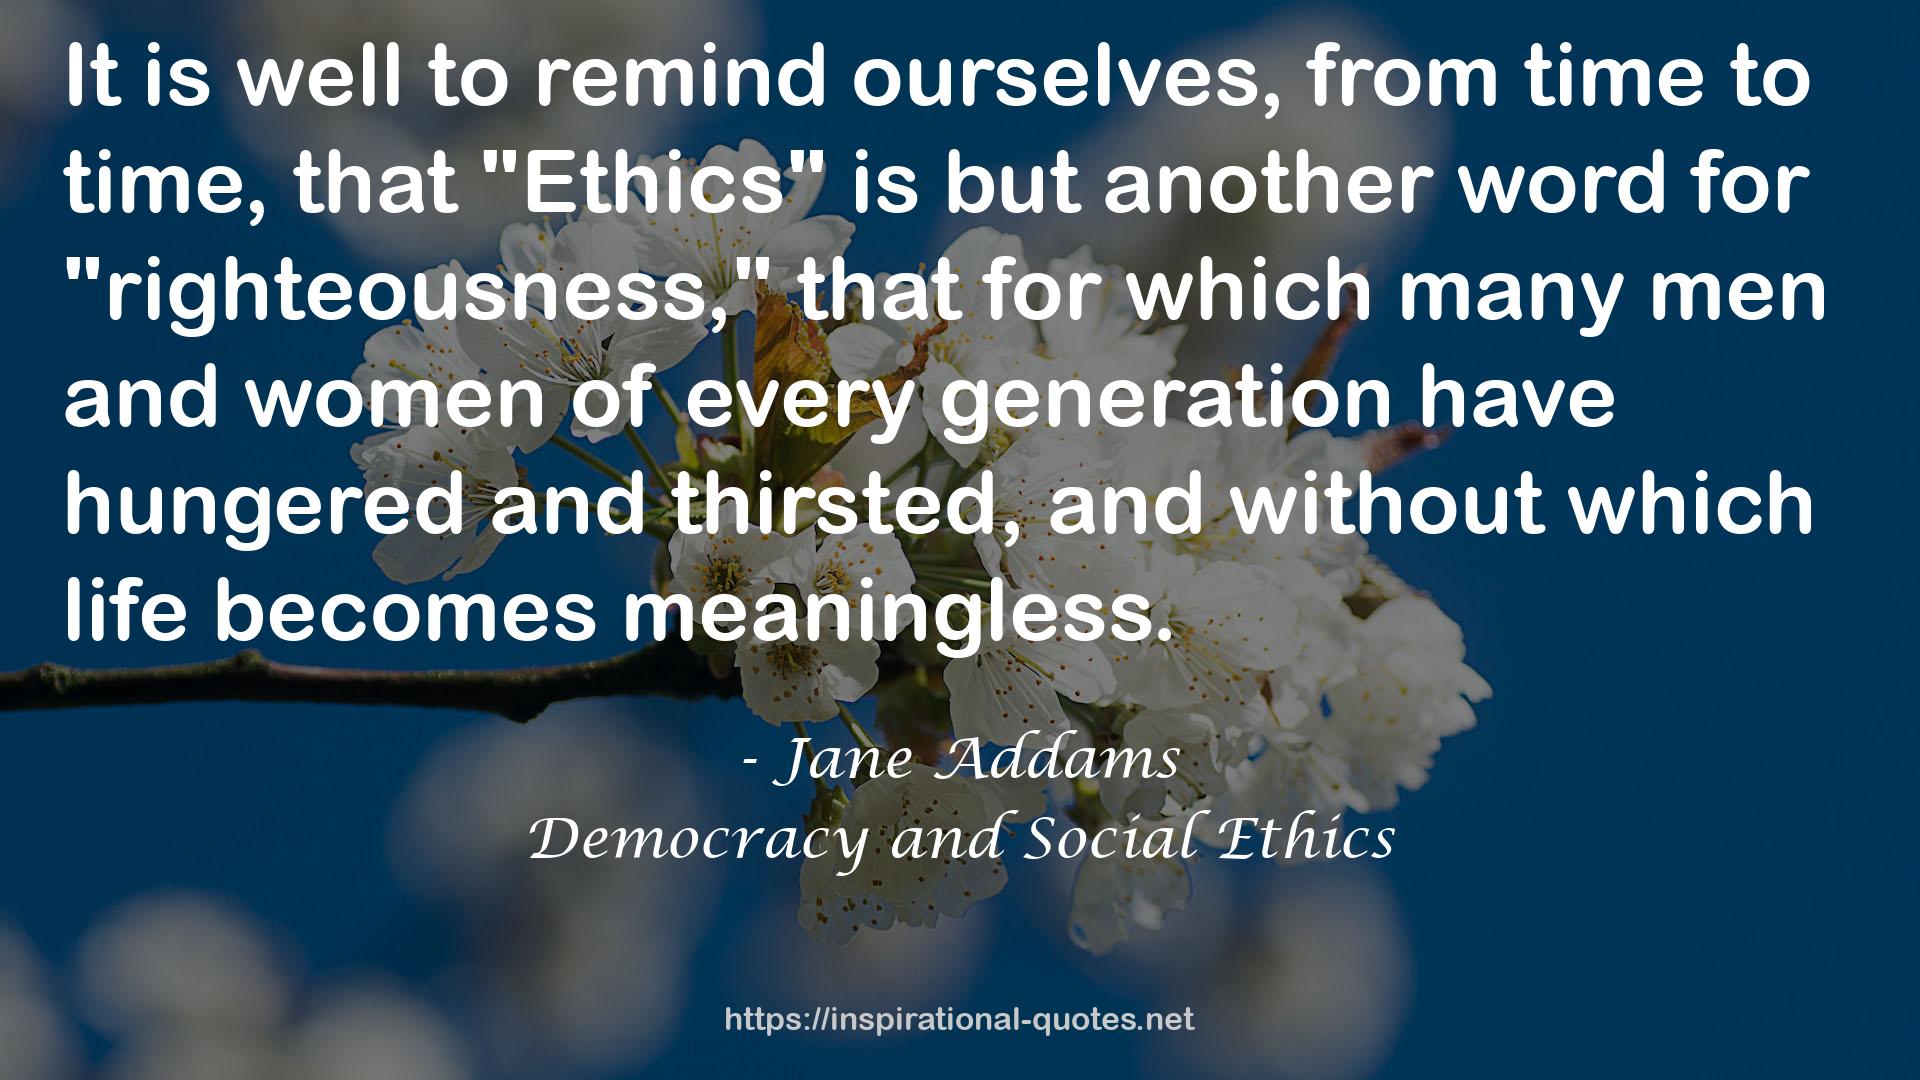 Democracy and Social Ethics QUOTES